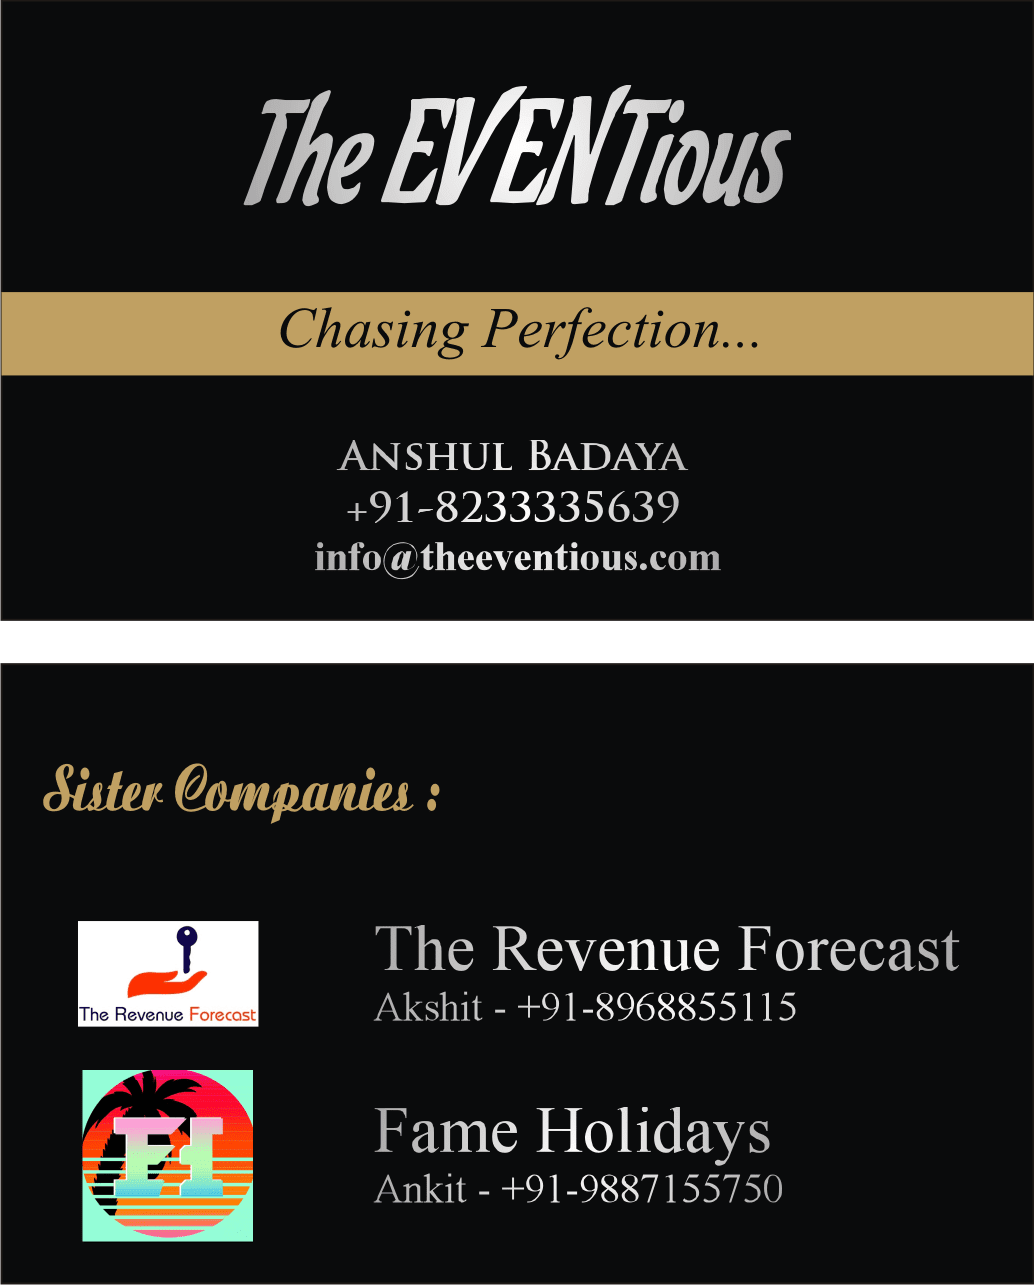 The EVENTious